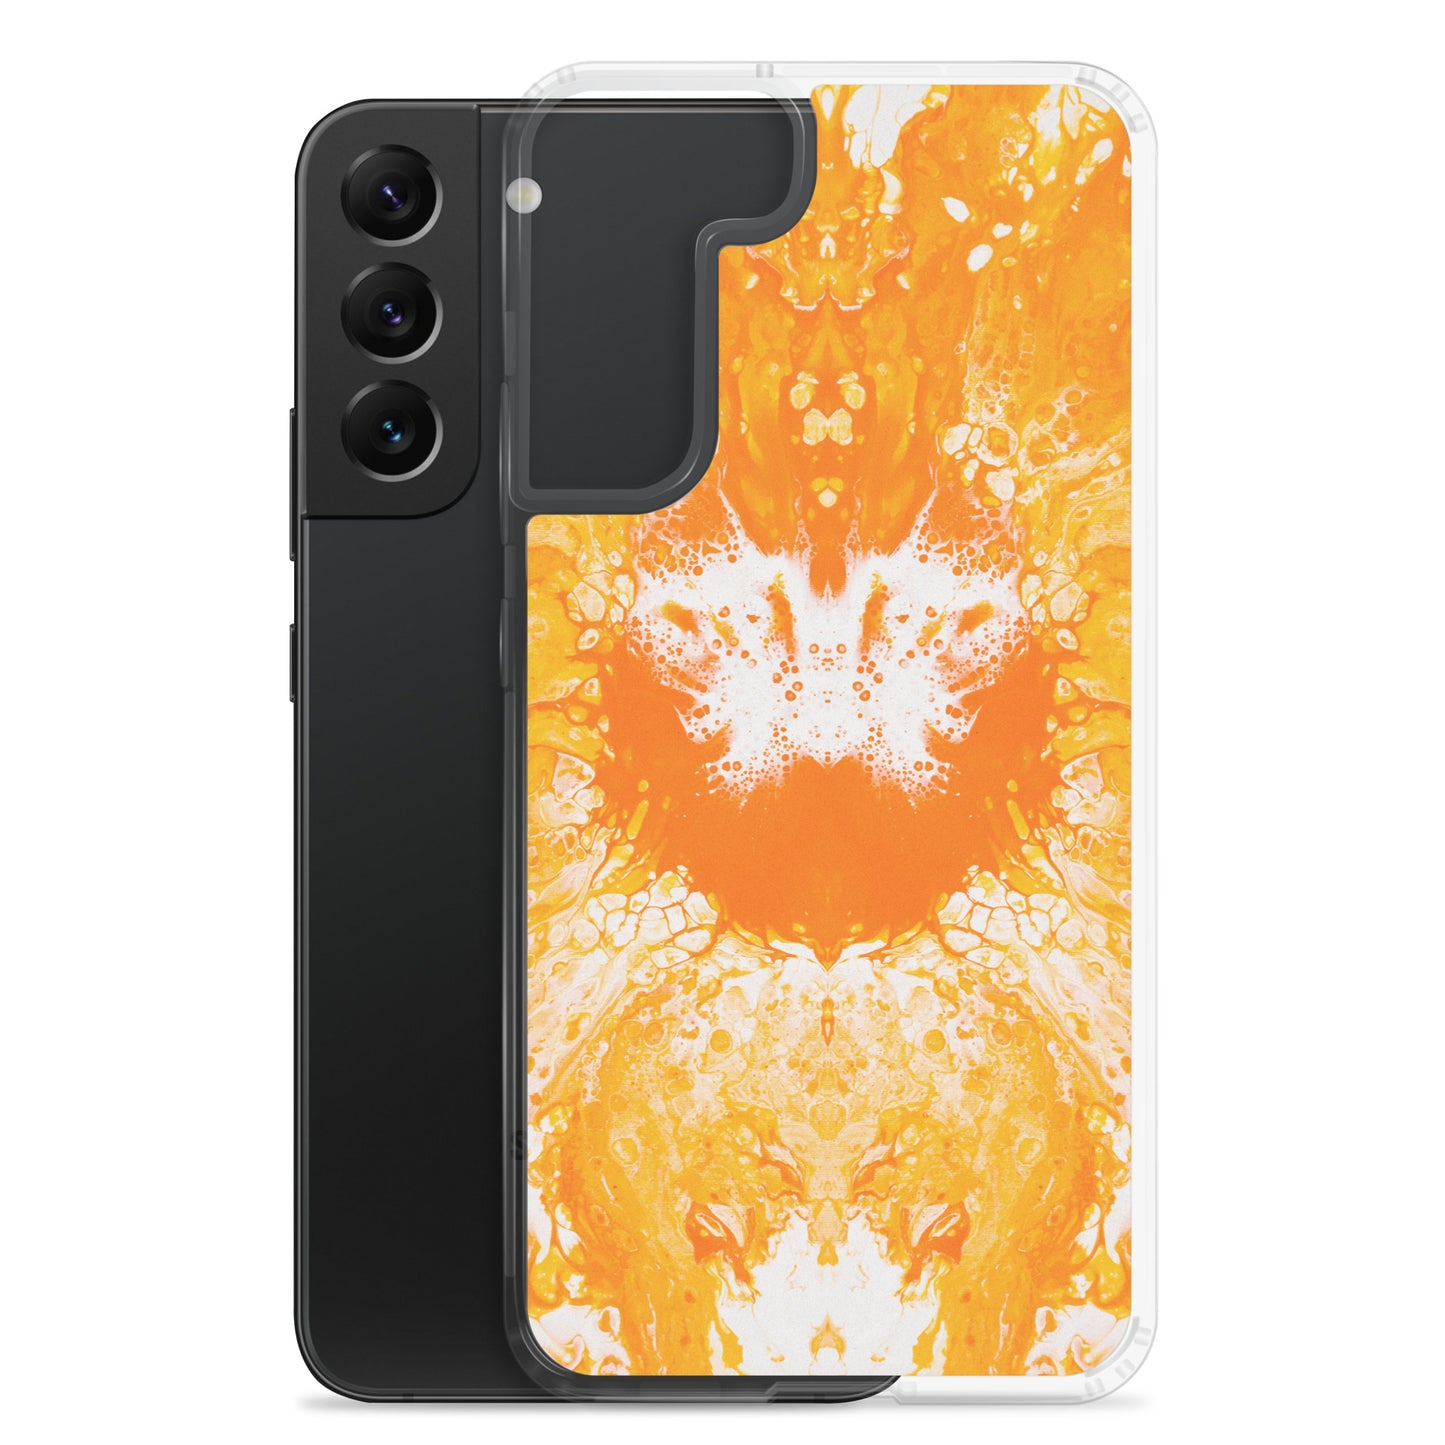 NightOwl Studio Custom Phone Case Compatible with Samsung Galaxy, Slim Cover for Wireless Charging, Drop and Scratch Resistant, Naranja